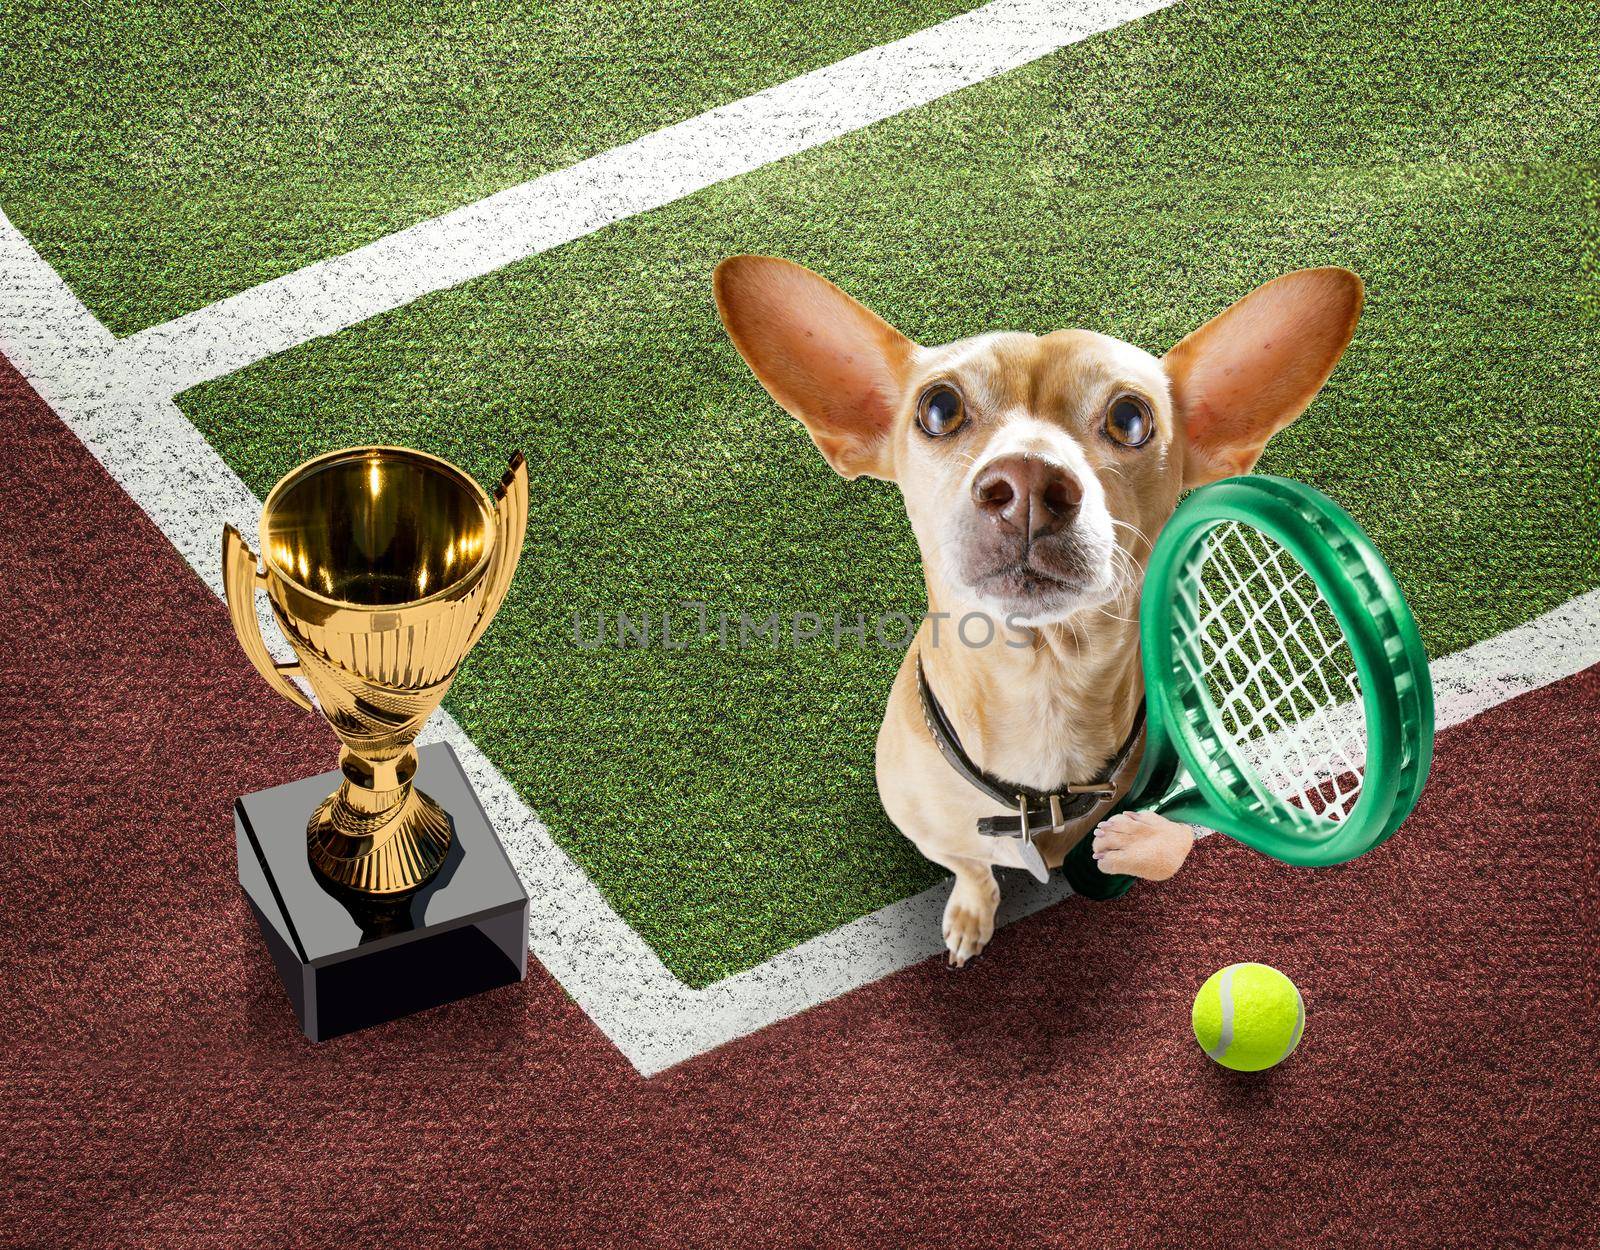 player sporty chihuahua dog on tennis field court with balls, ready for a play or game and win a trophy